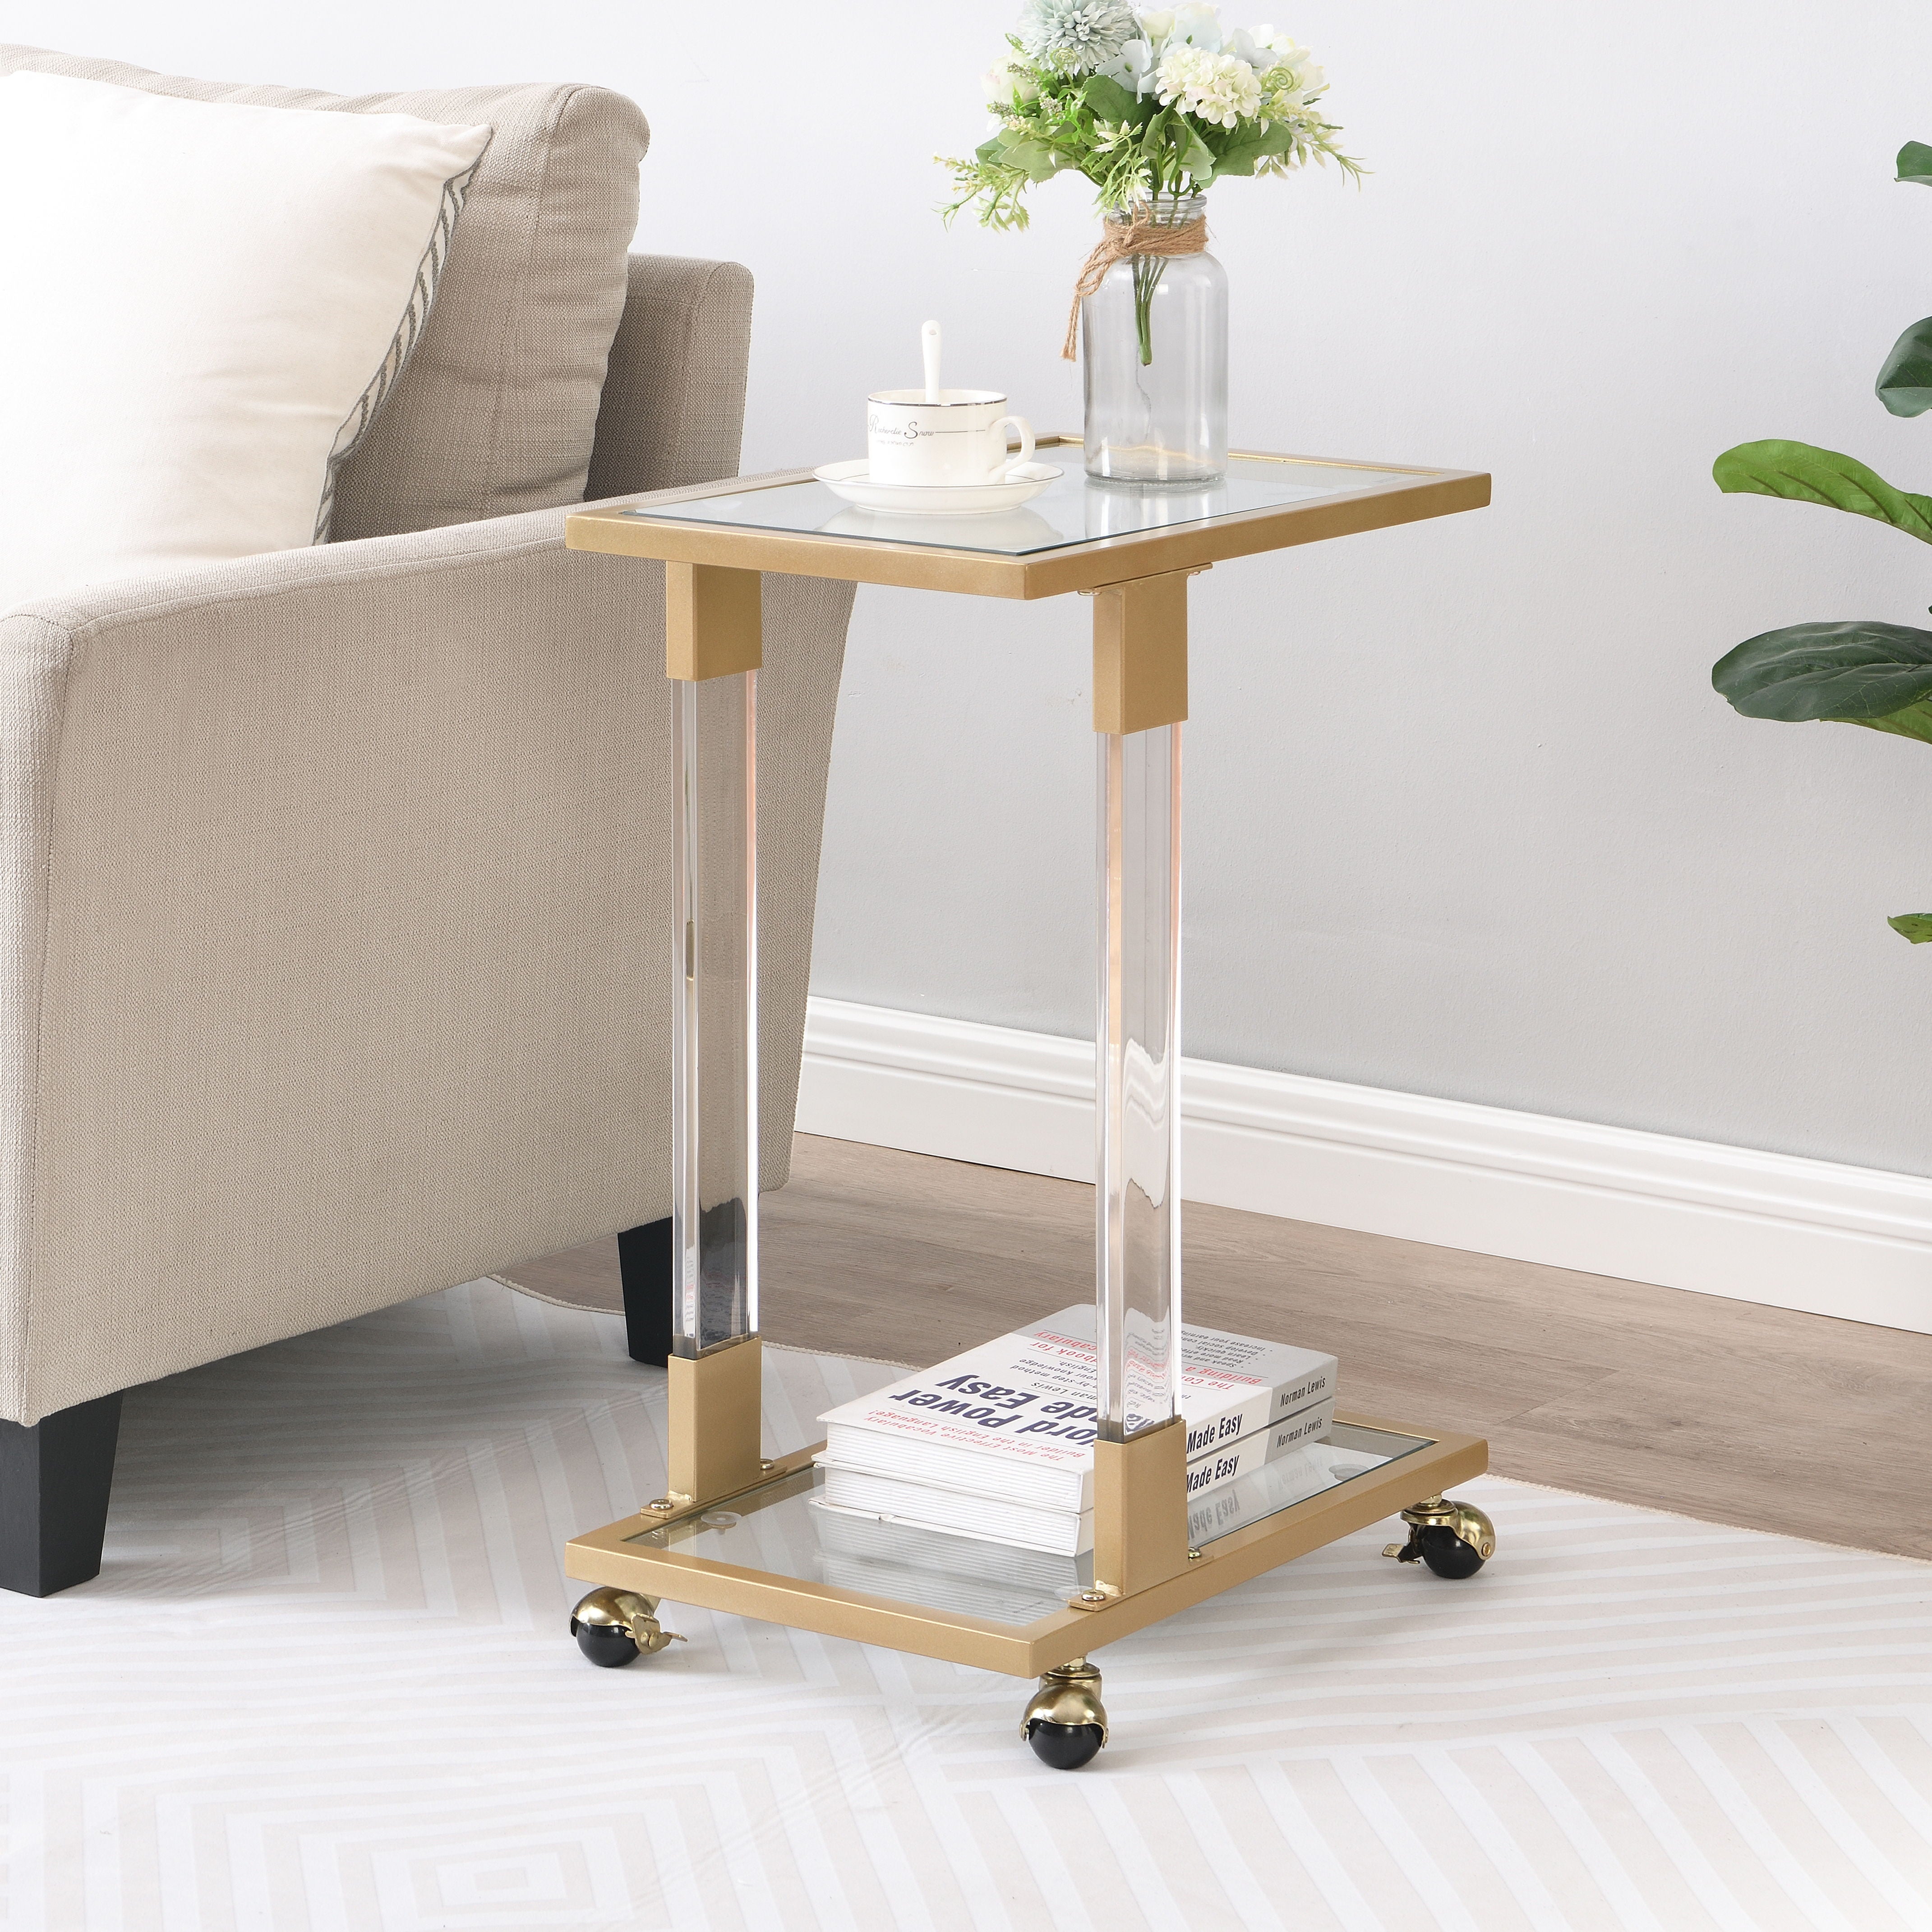 Golden Side Table, Acrylic Sofa Table, Glass Top C Shape Square Table With Metal Base For Living Room, Bedroom, Balcony Home And Office